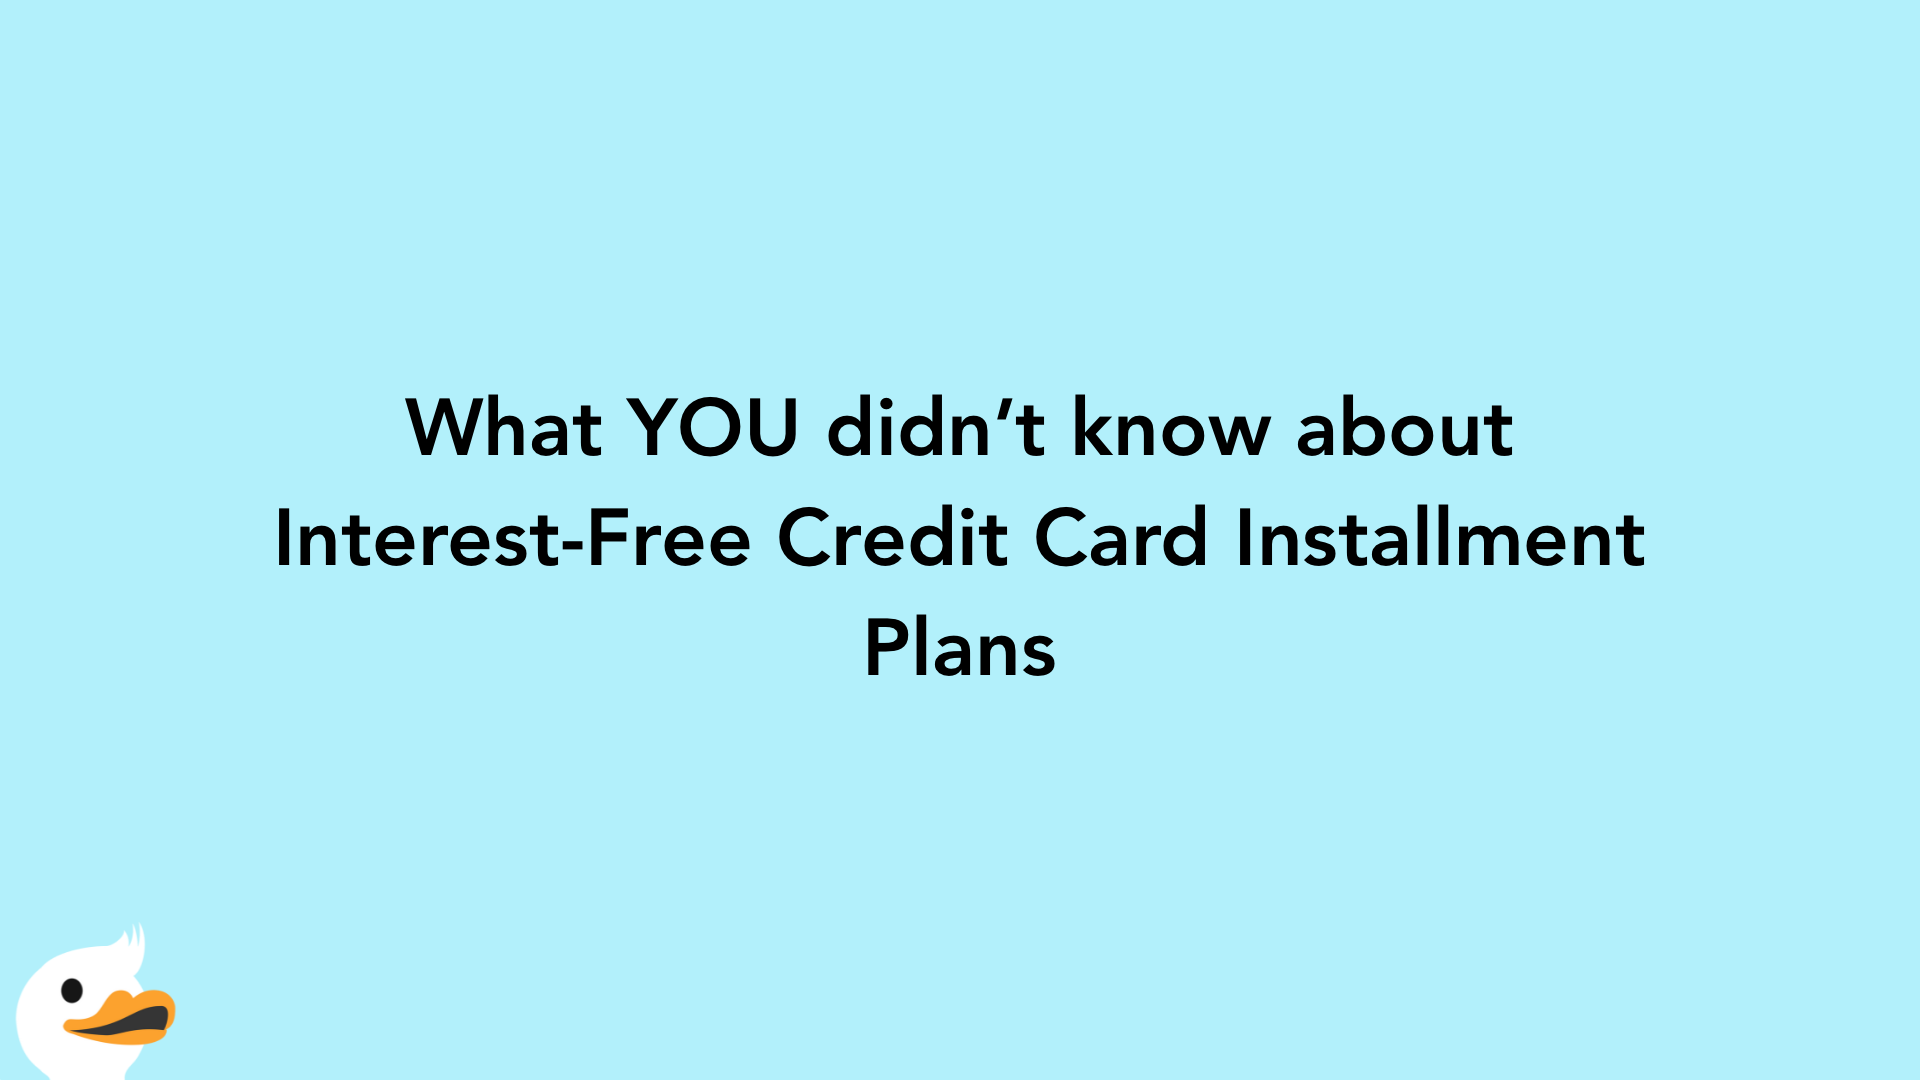 What YOU didn’t know about Interest-Free Credit Card Installment Plans